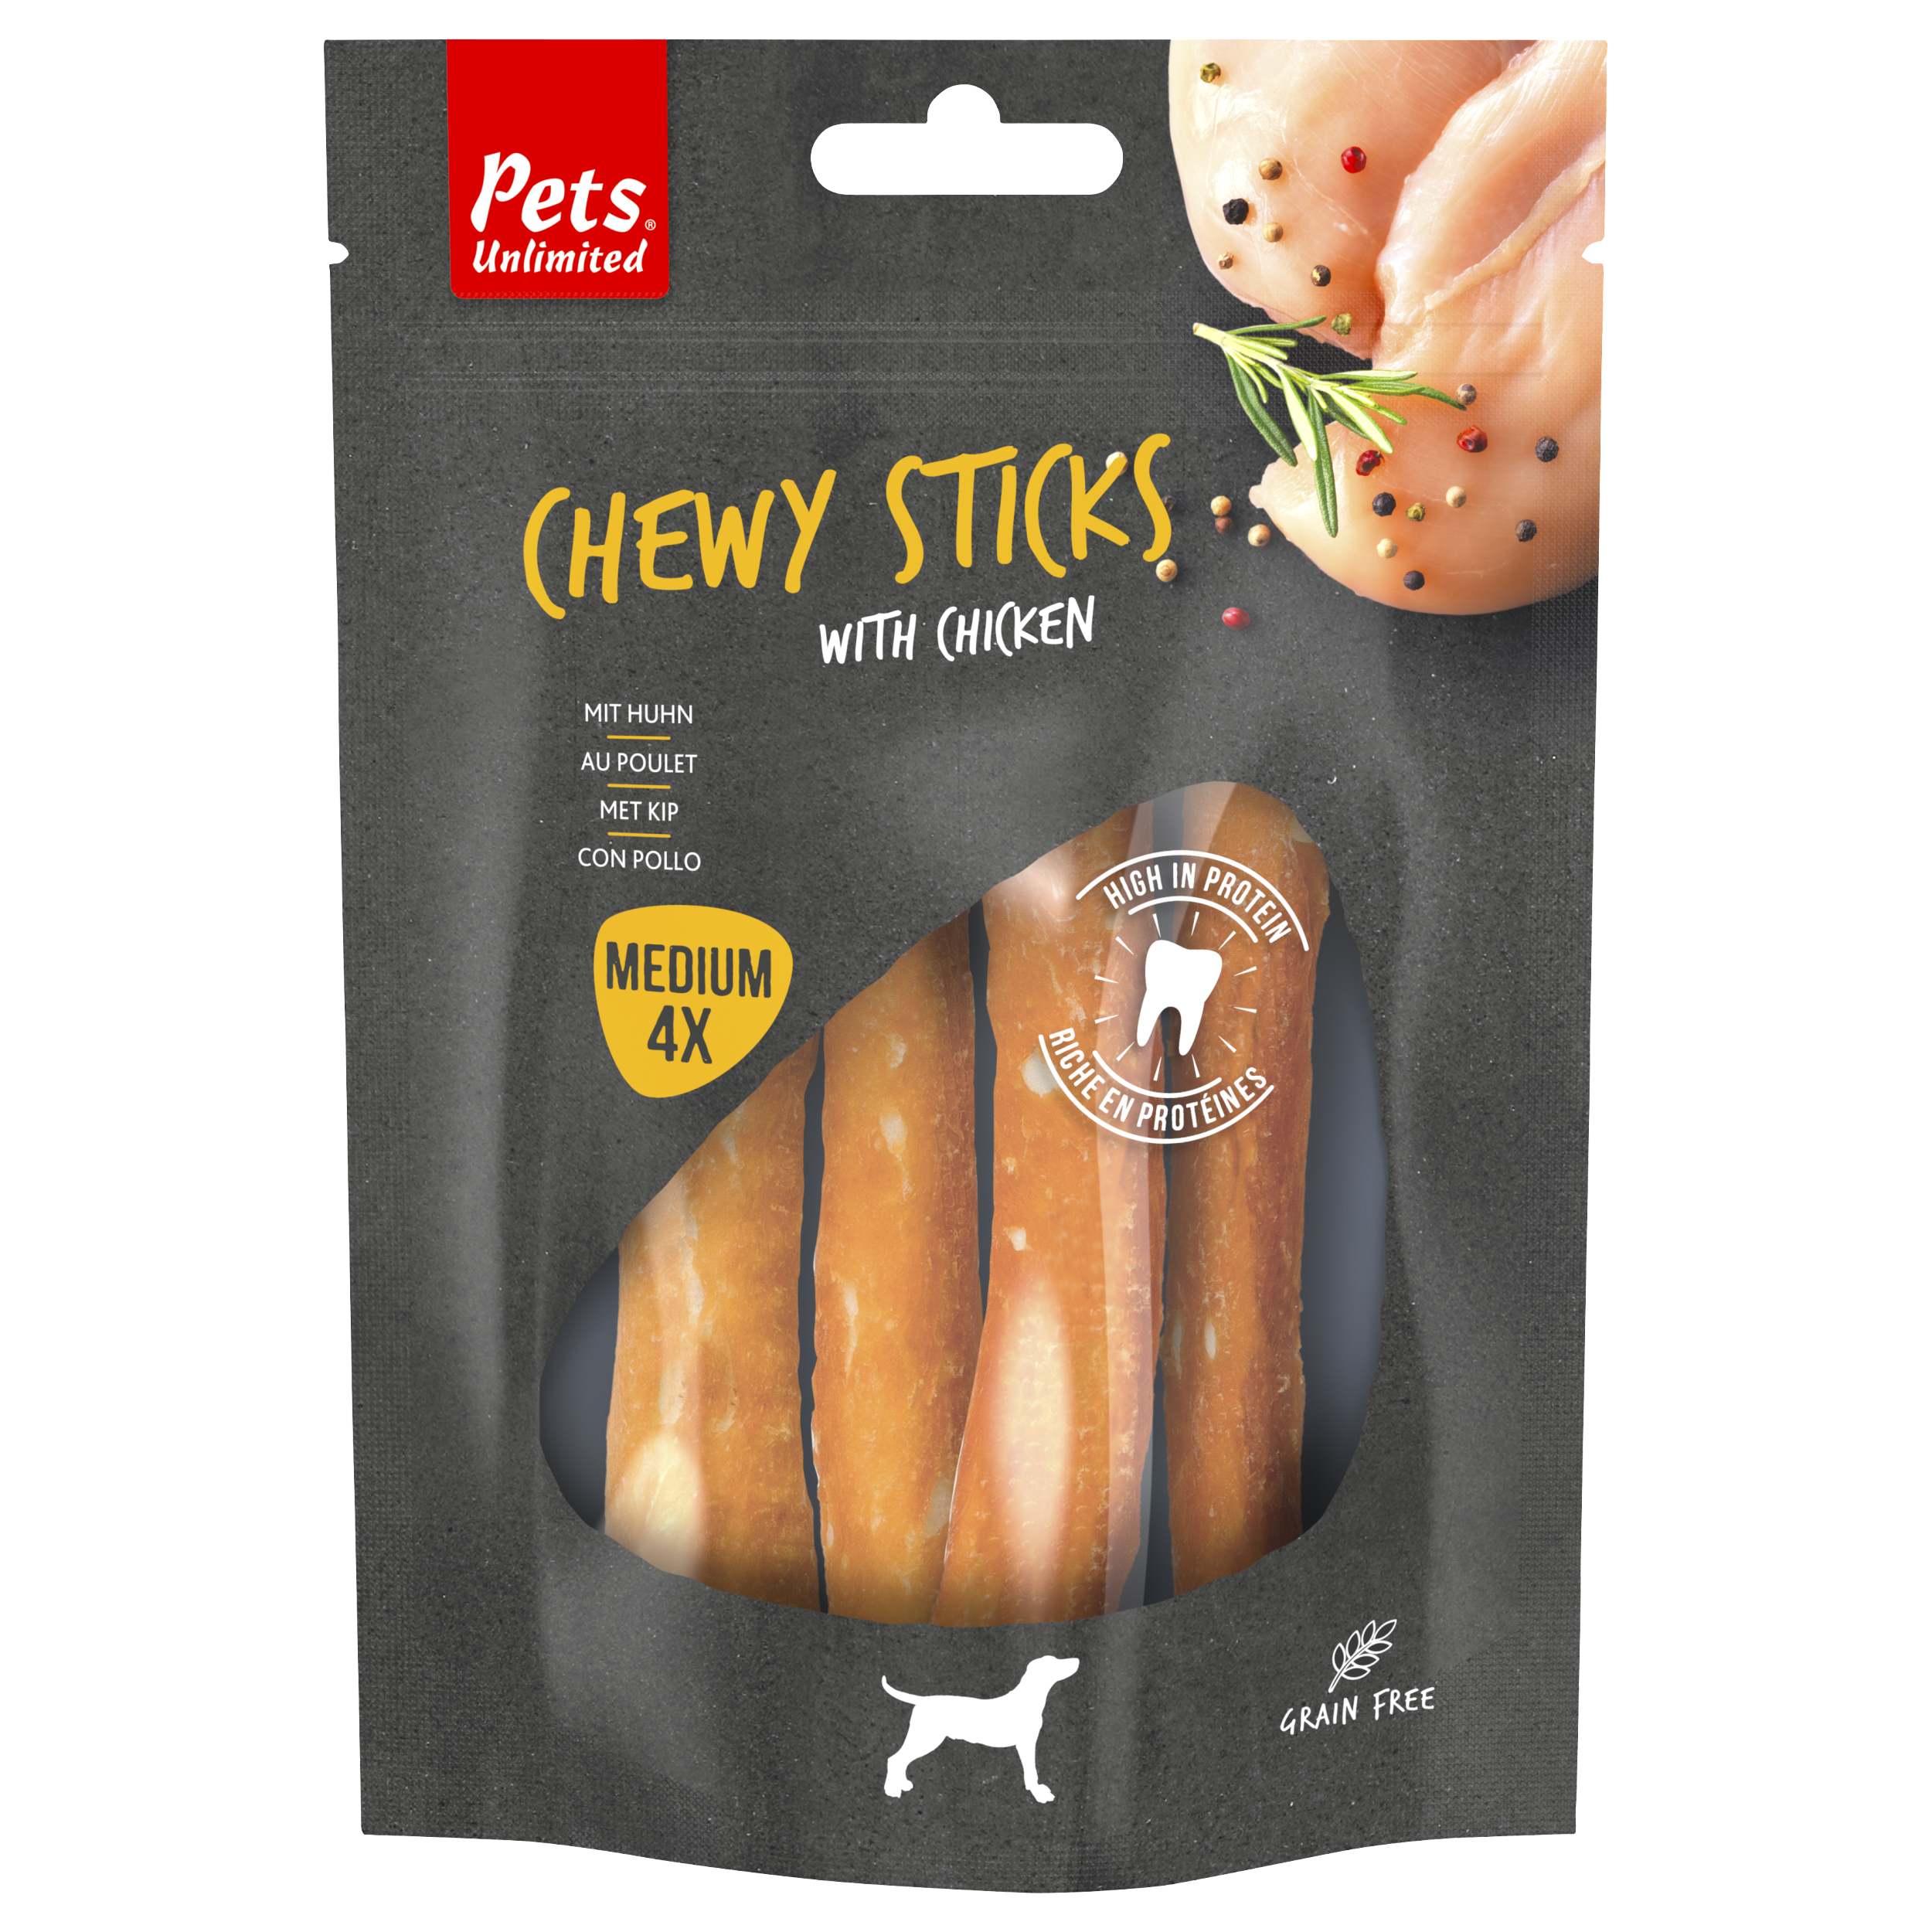 Chewy stick with chicken medium, 4 pieces